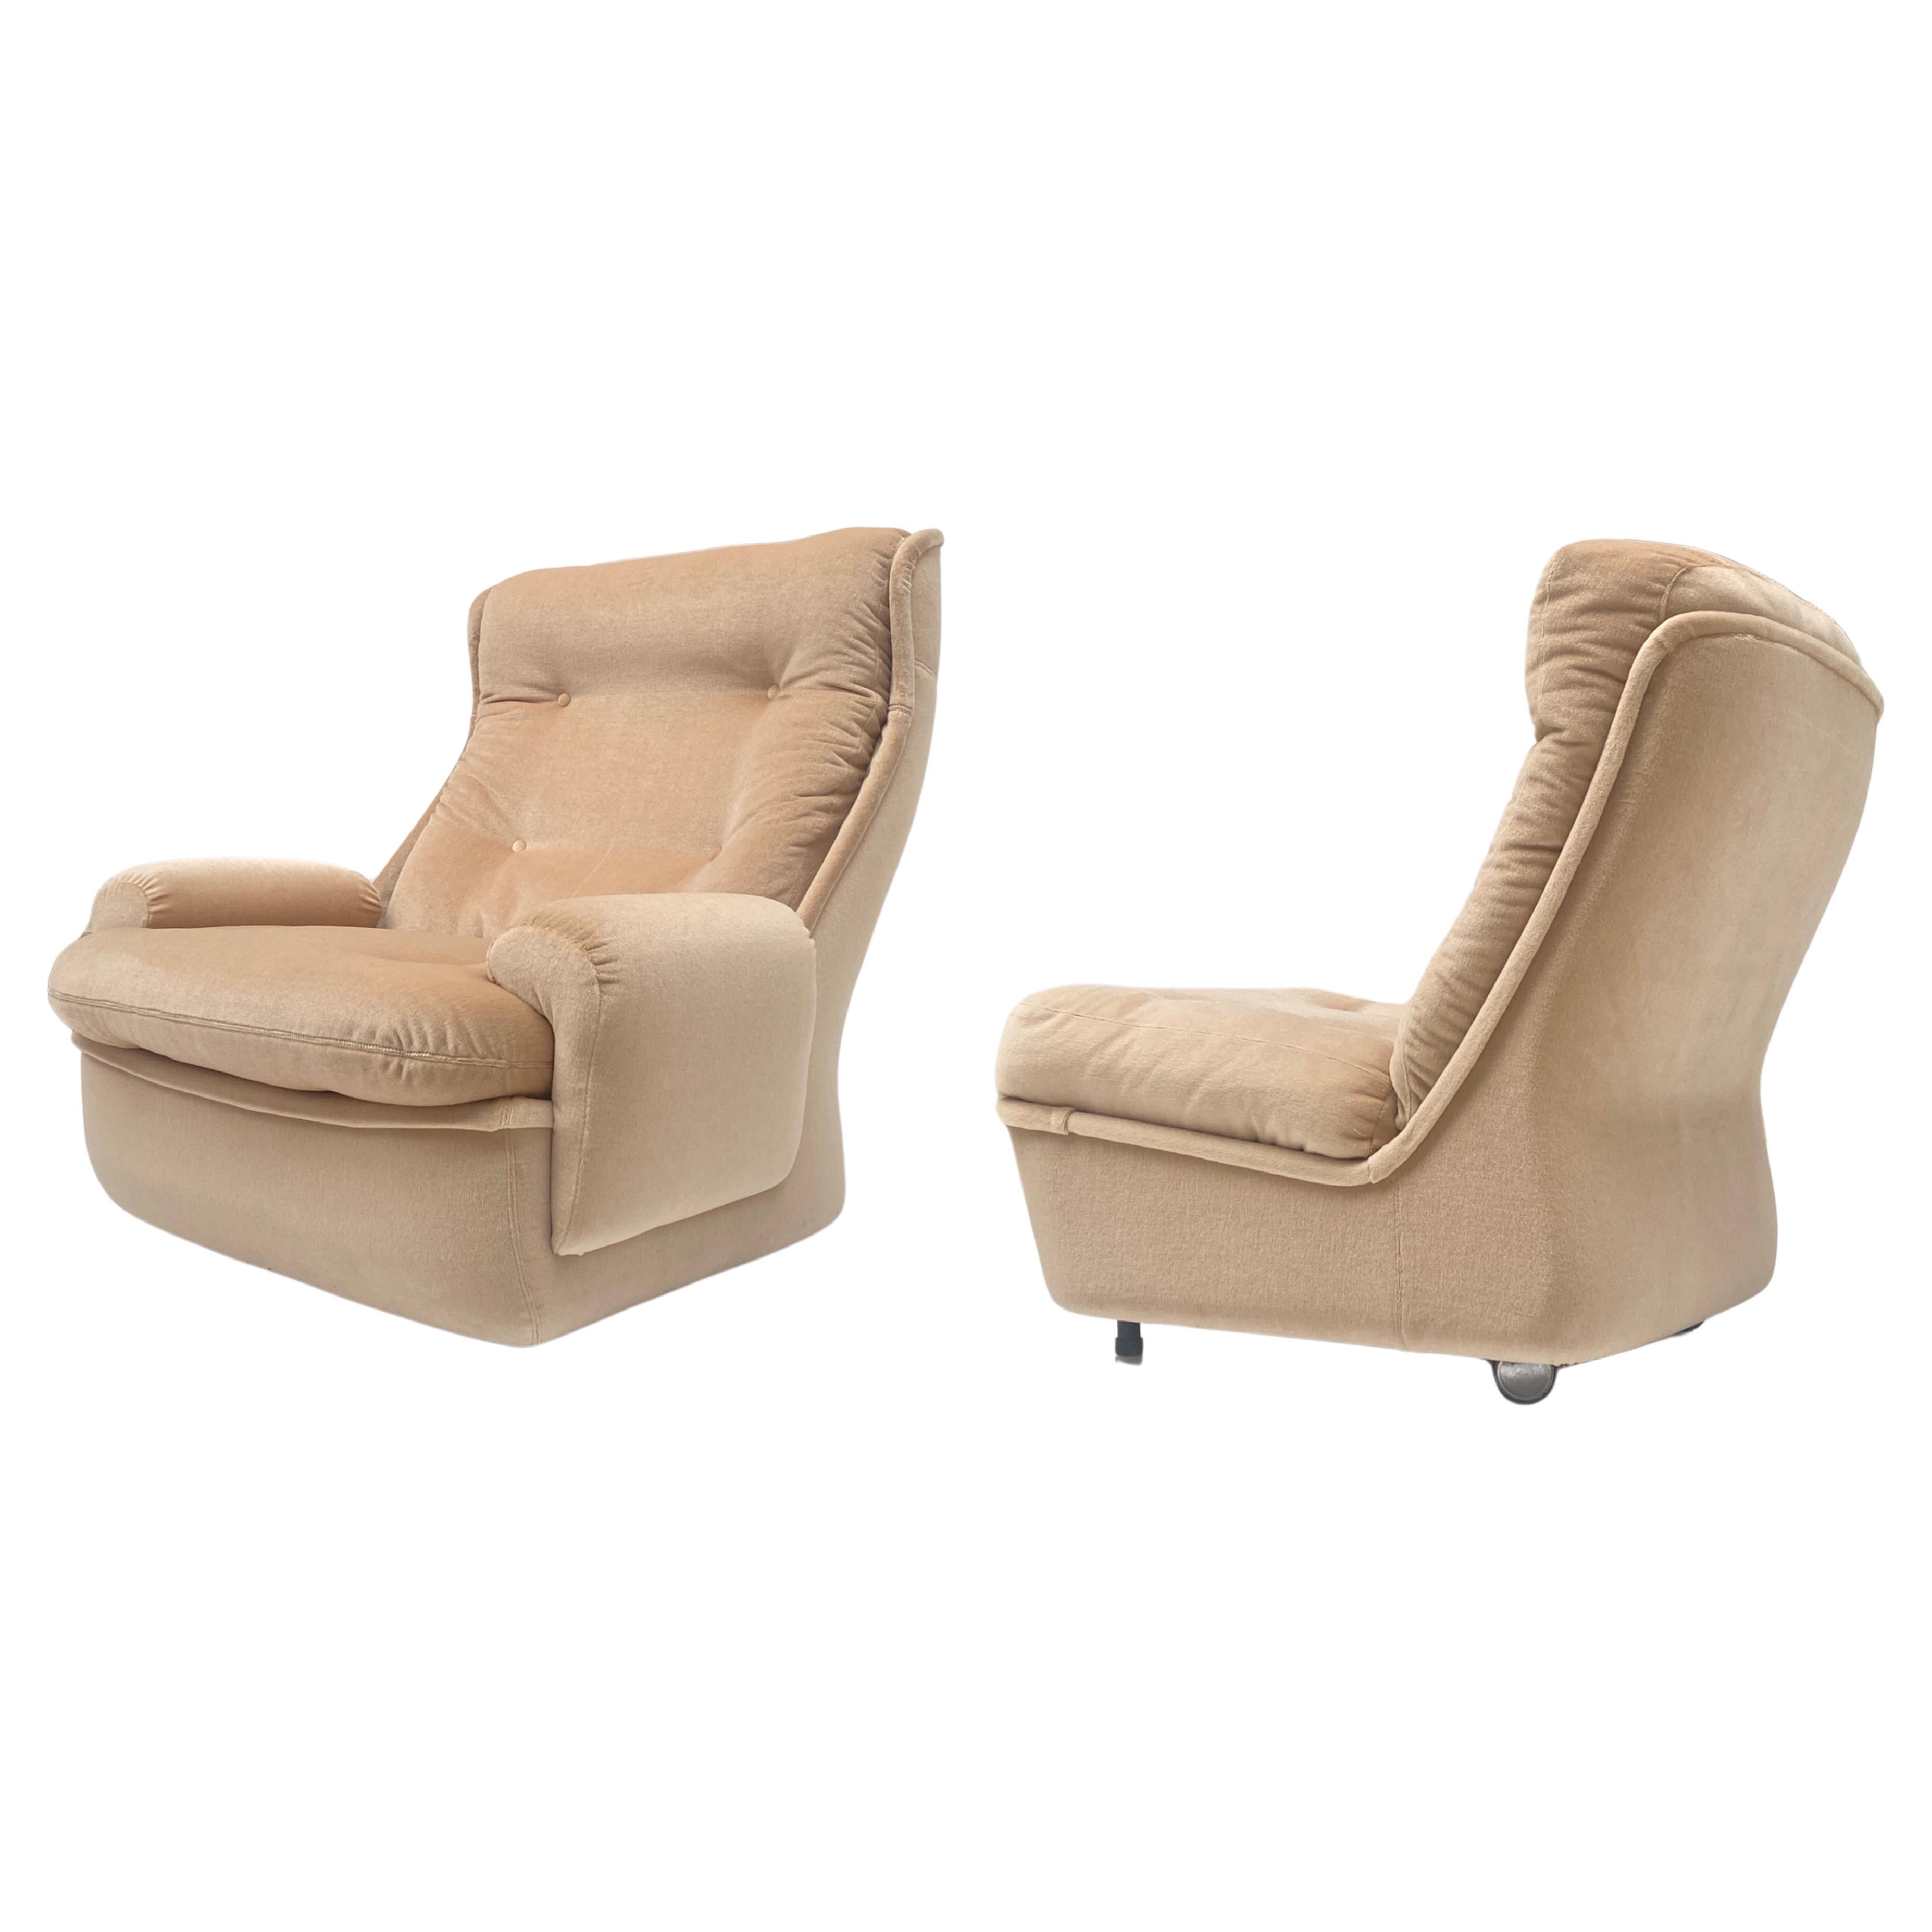 Space Age Mohair “Orchidée” Lounge Chairs Michel Cadestin, Airborne, France 1968 For Sale